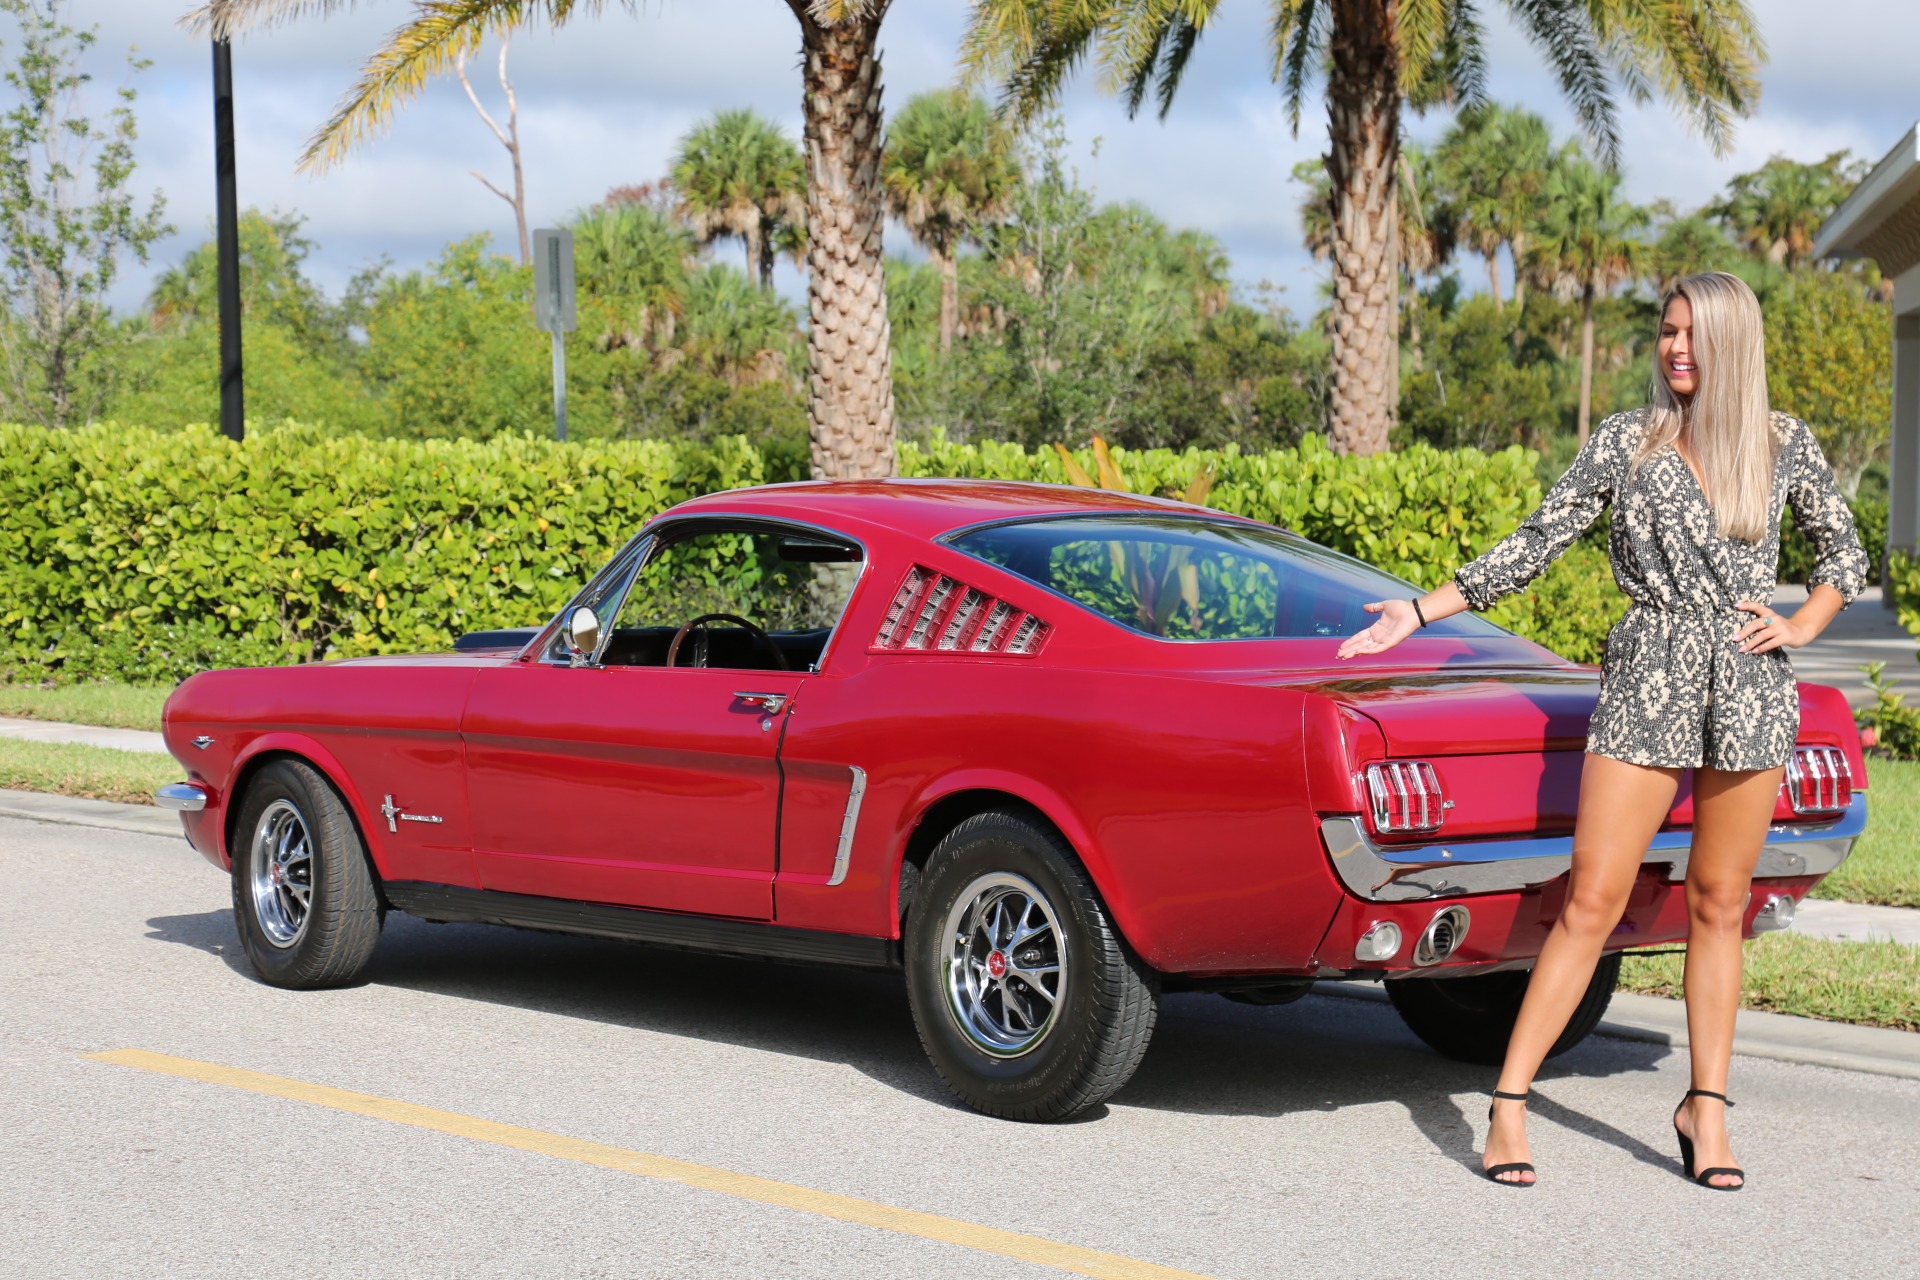 Used 1966 Ford Mustang Fastback 2+2 for sale Sold at Muscle Cars for Sale Inc. in Fort Myers FL 33912 6